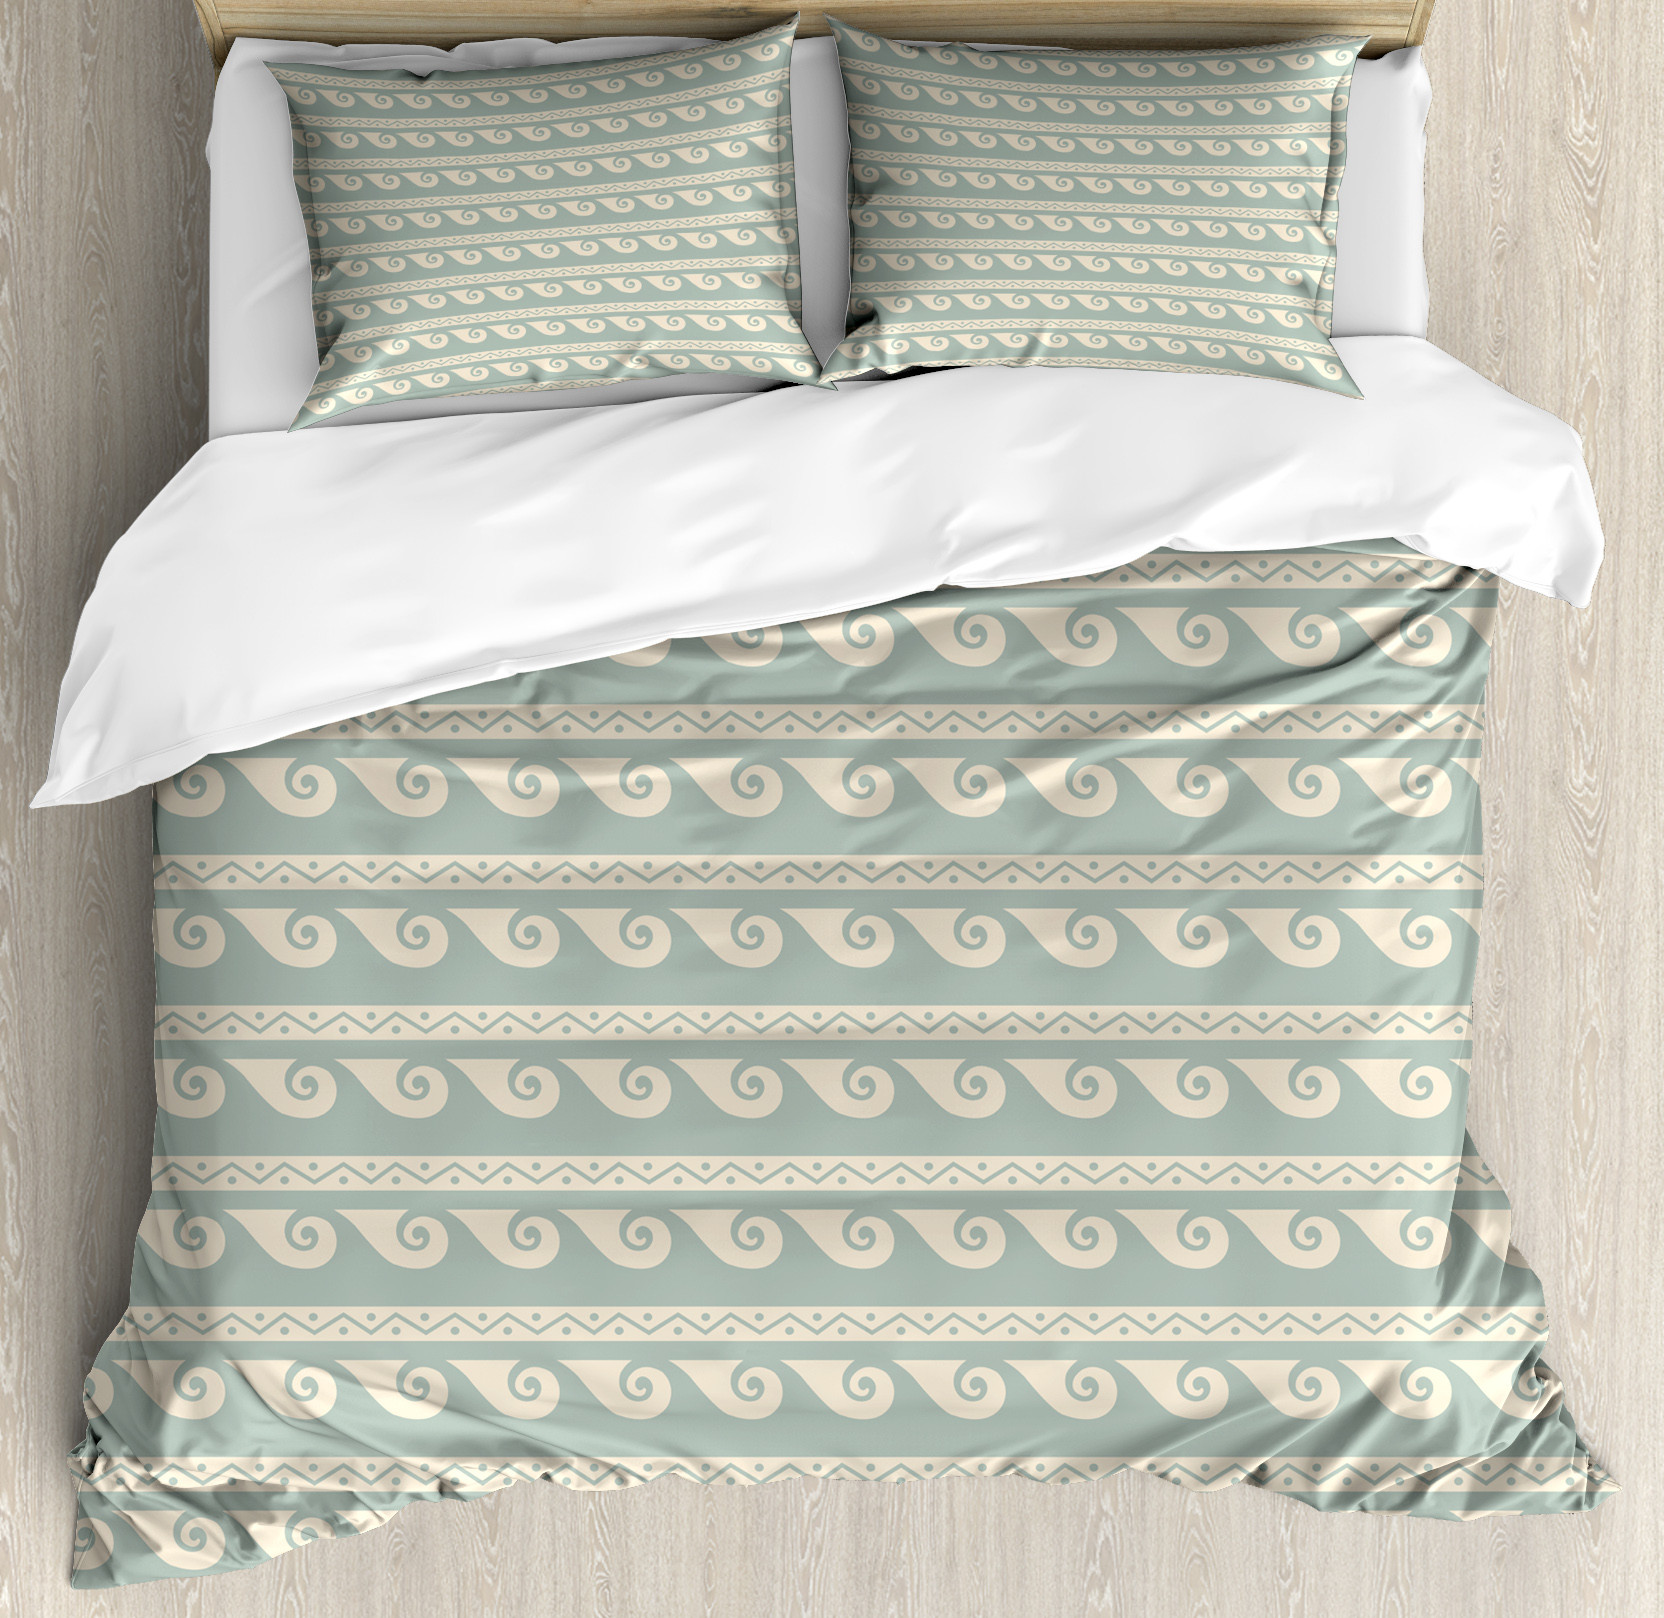 Waves Duvet Cover Set, Continuous Greek Design Wavy Sea Elements Bicolored Composition Print, Decorative 3 Piece Bedding Set with 2 Pillow Shams, Calking Size, Dark Sea Green Champagne, by Ambesonne - image 1 of 3